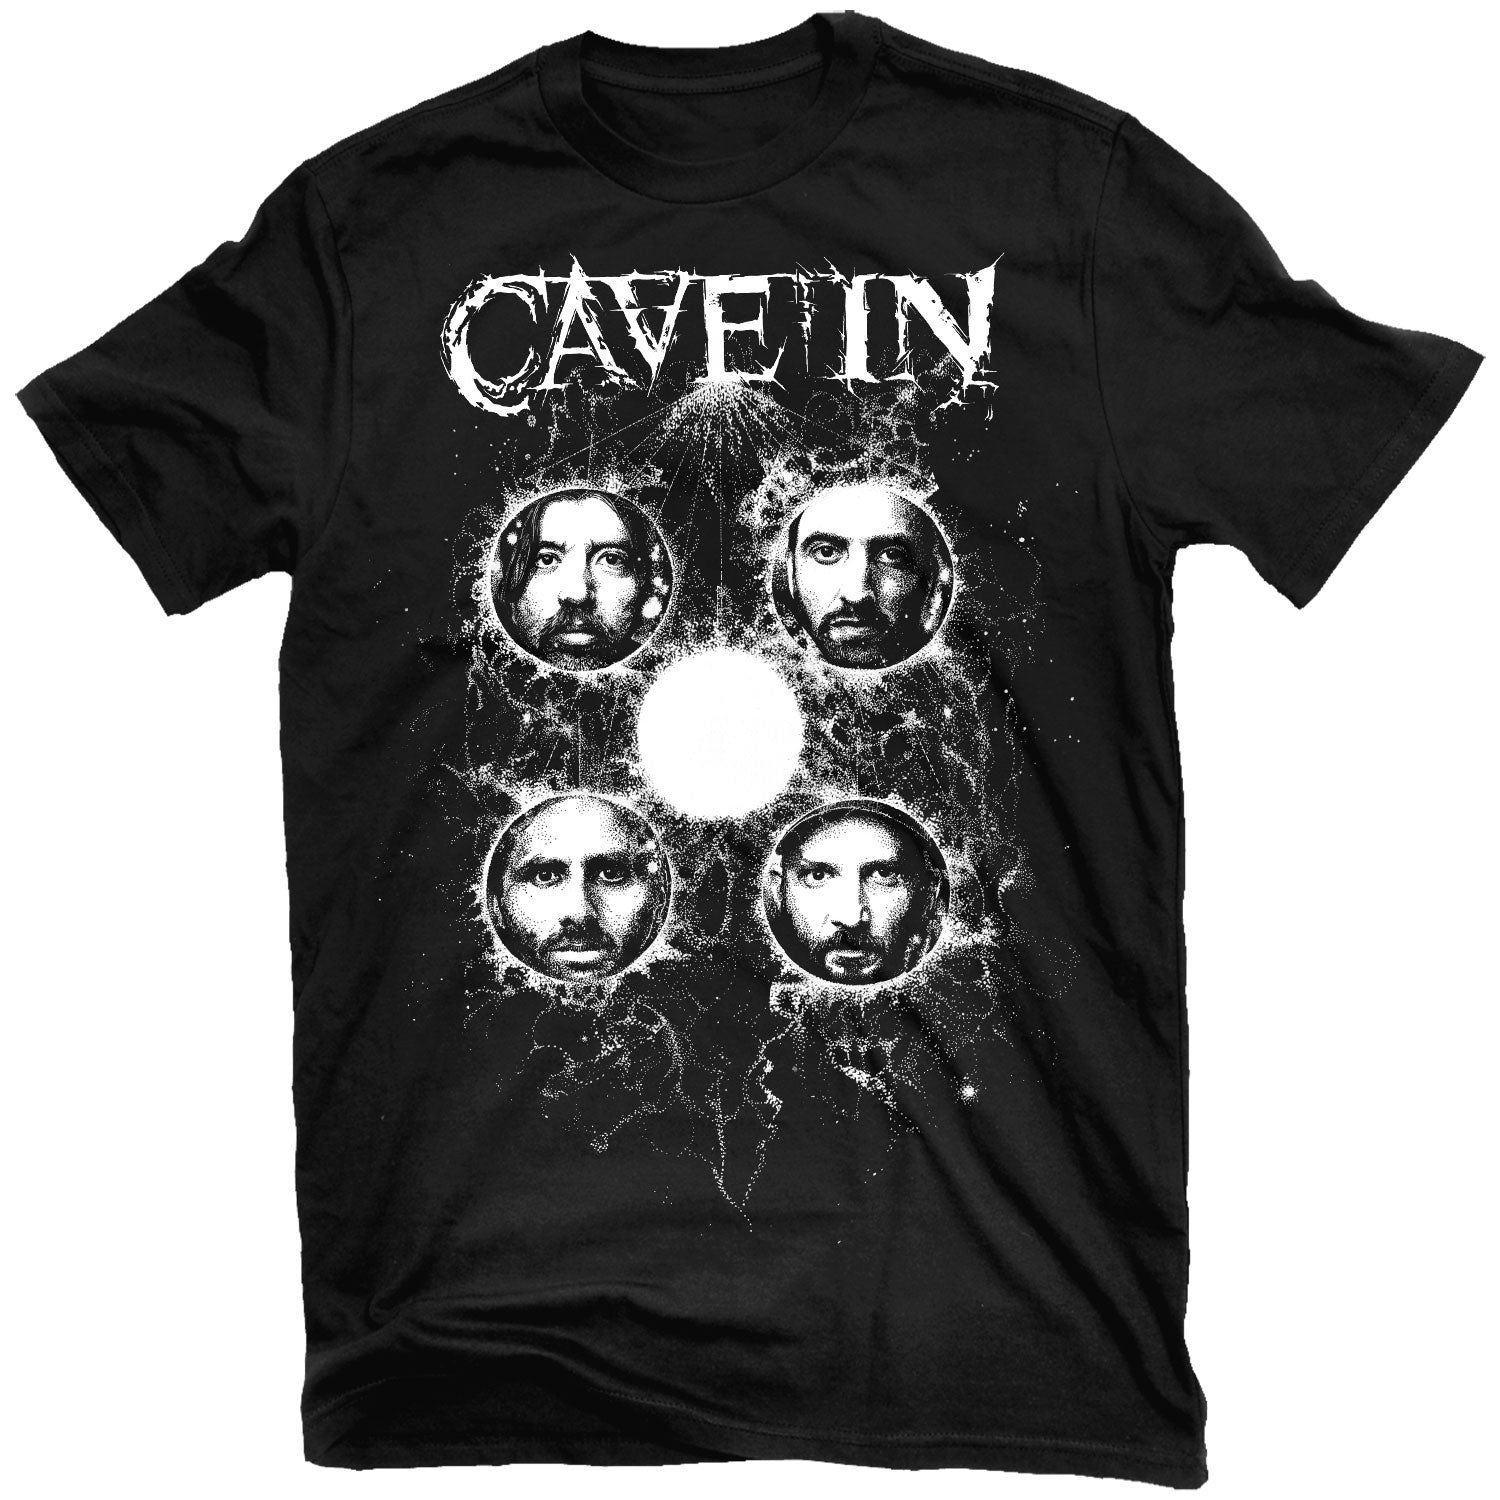 Cave In "Nightmare Eyes" T-Shirt